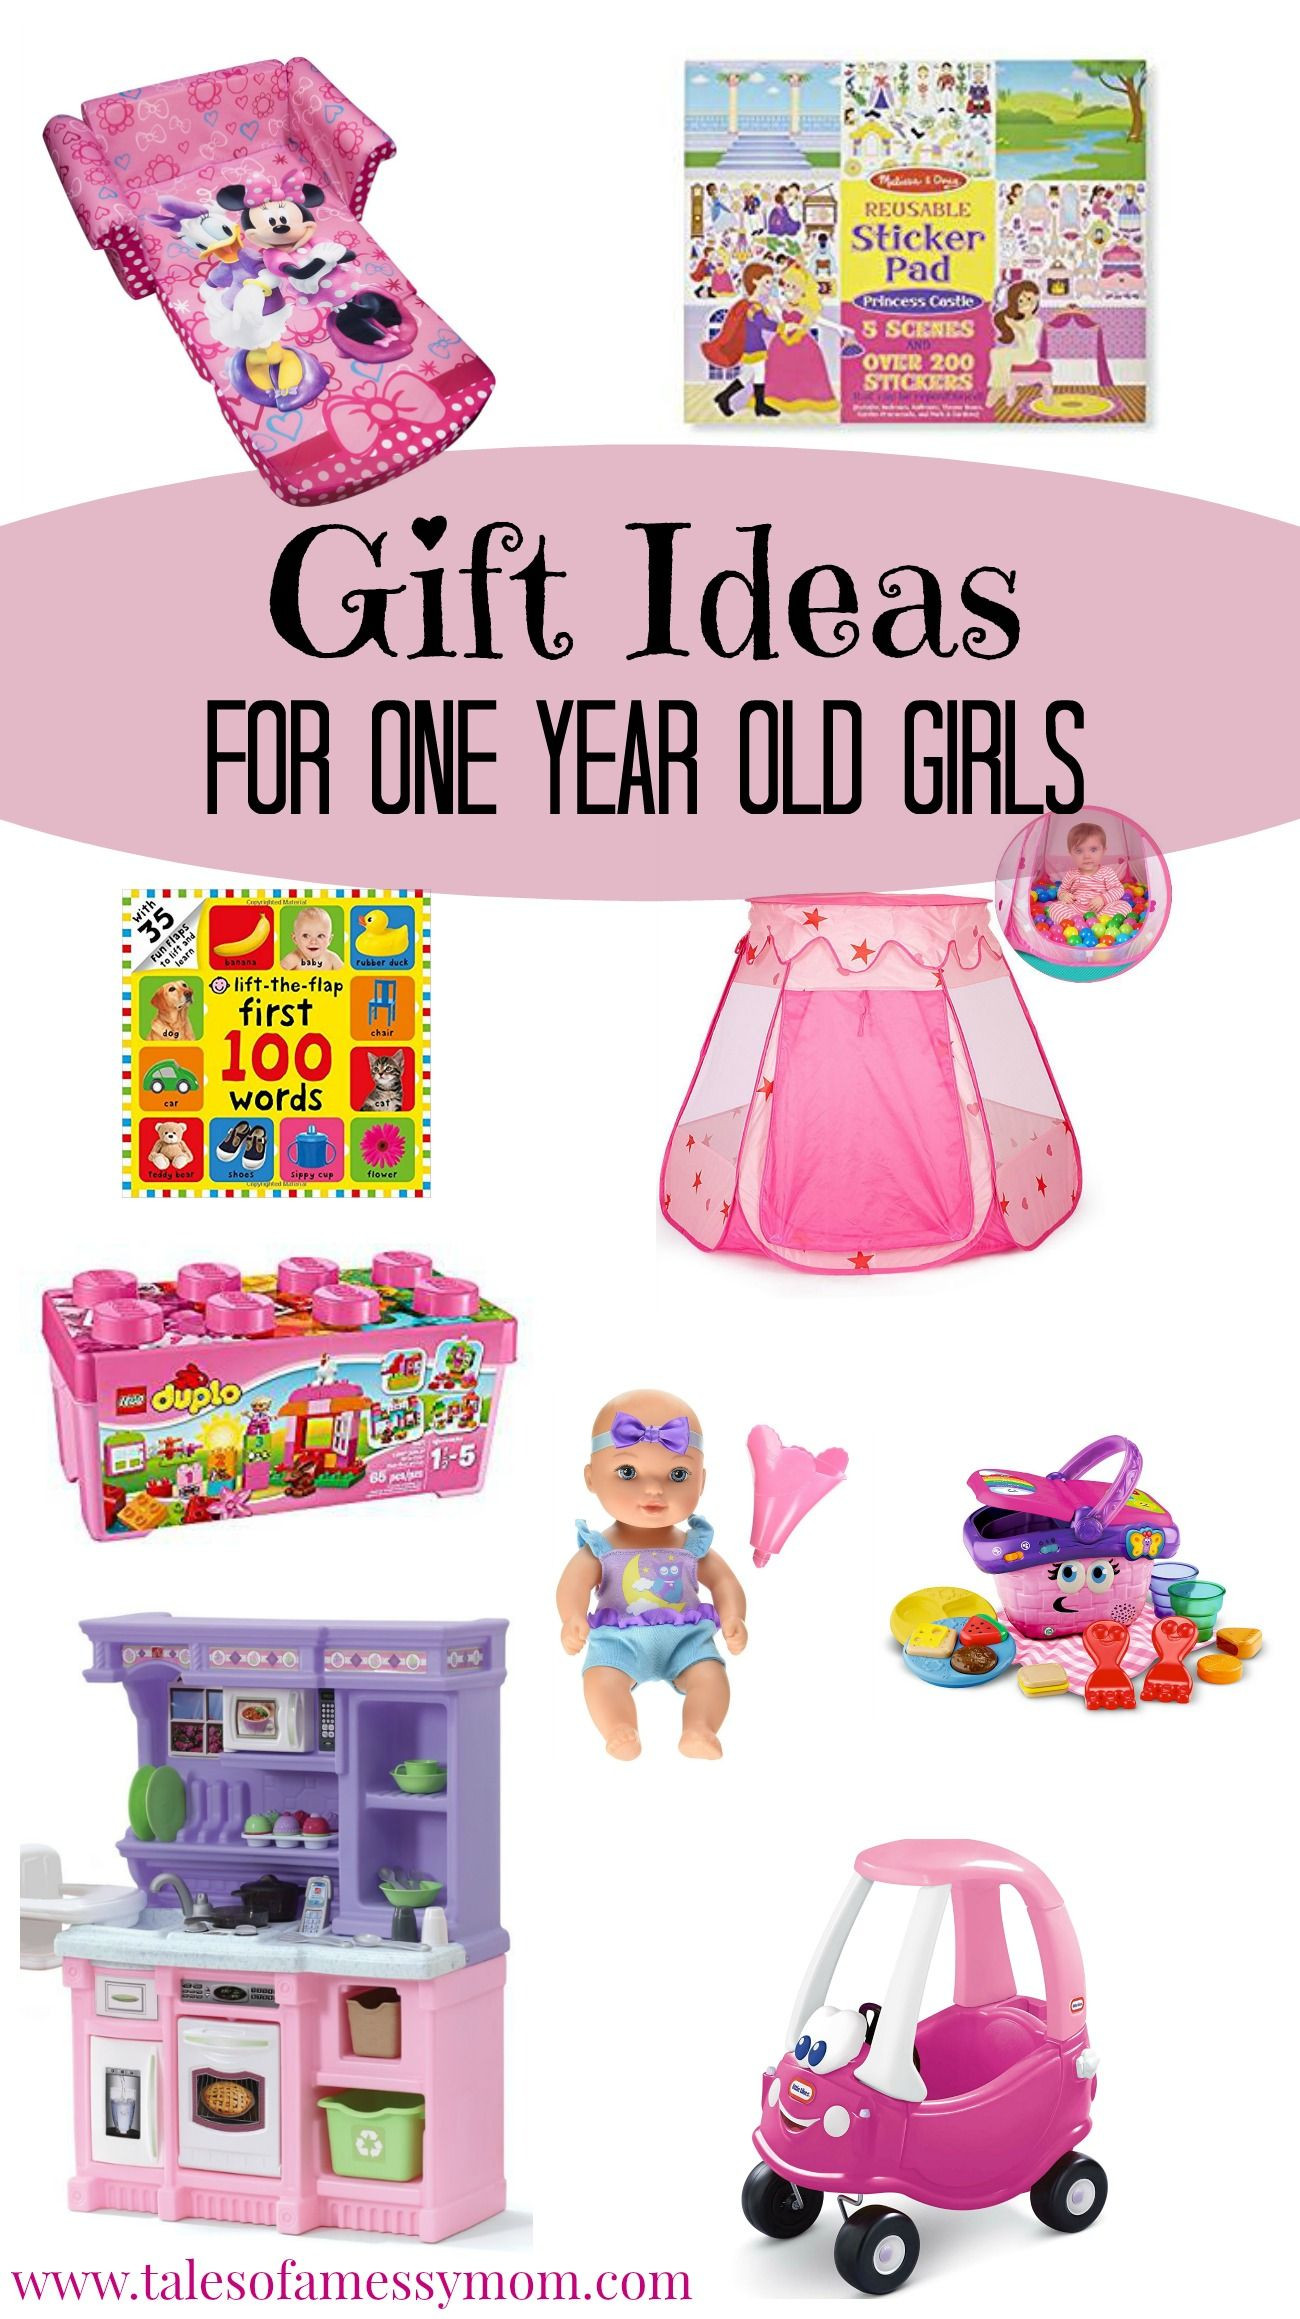 1 Yr Old Girl Birthday Gift Ideas
 Gift Ideas for e Year Old Girls